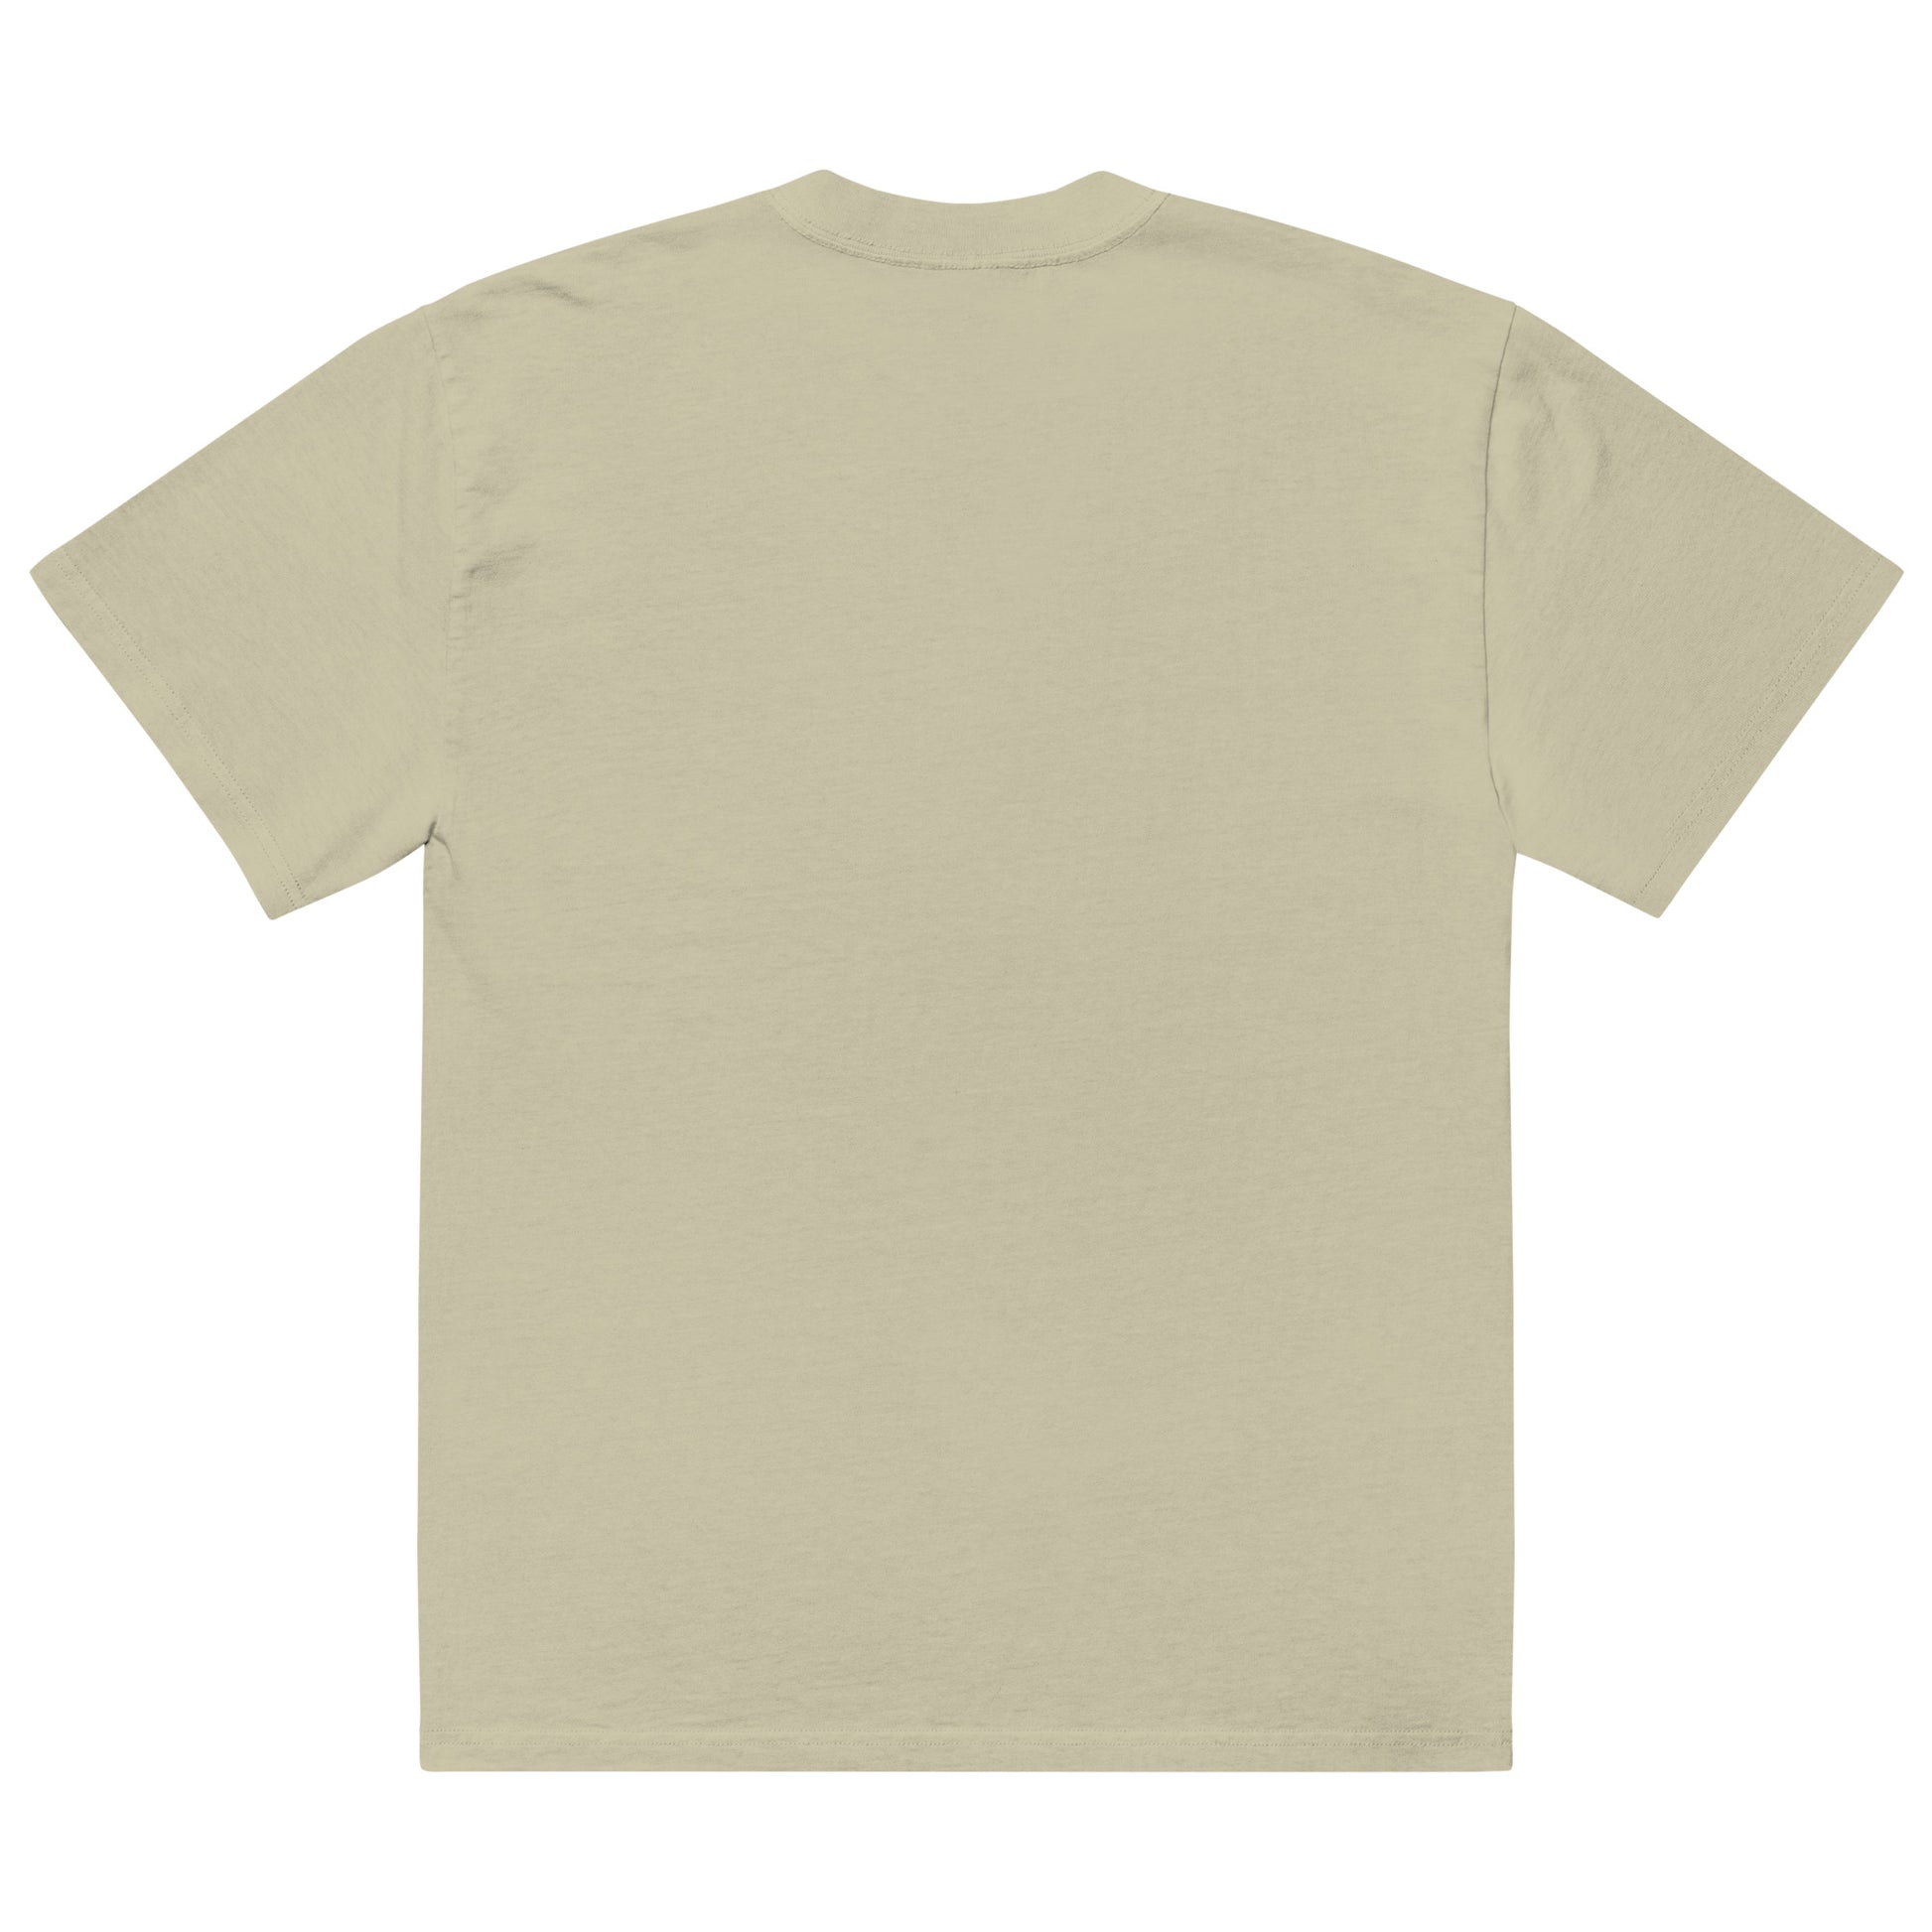 Oversized faded t-shirt - House of S & N